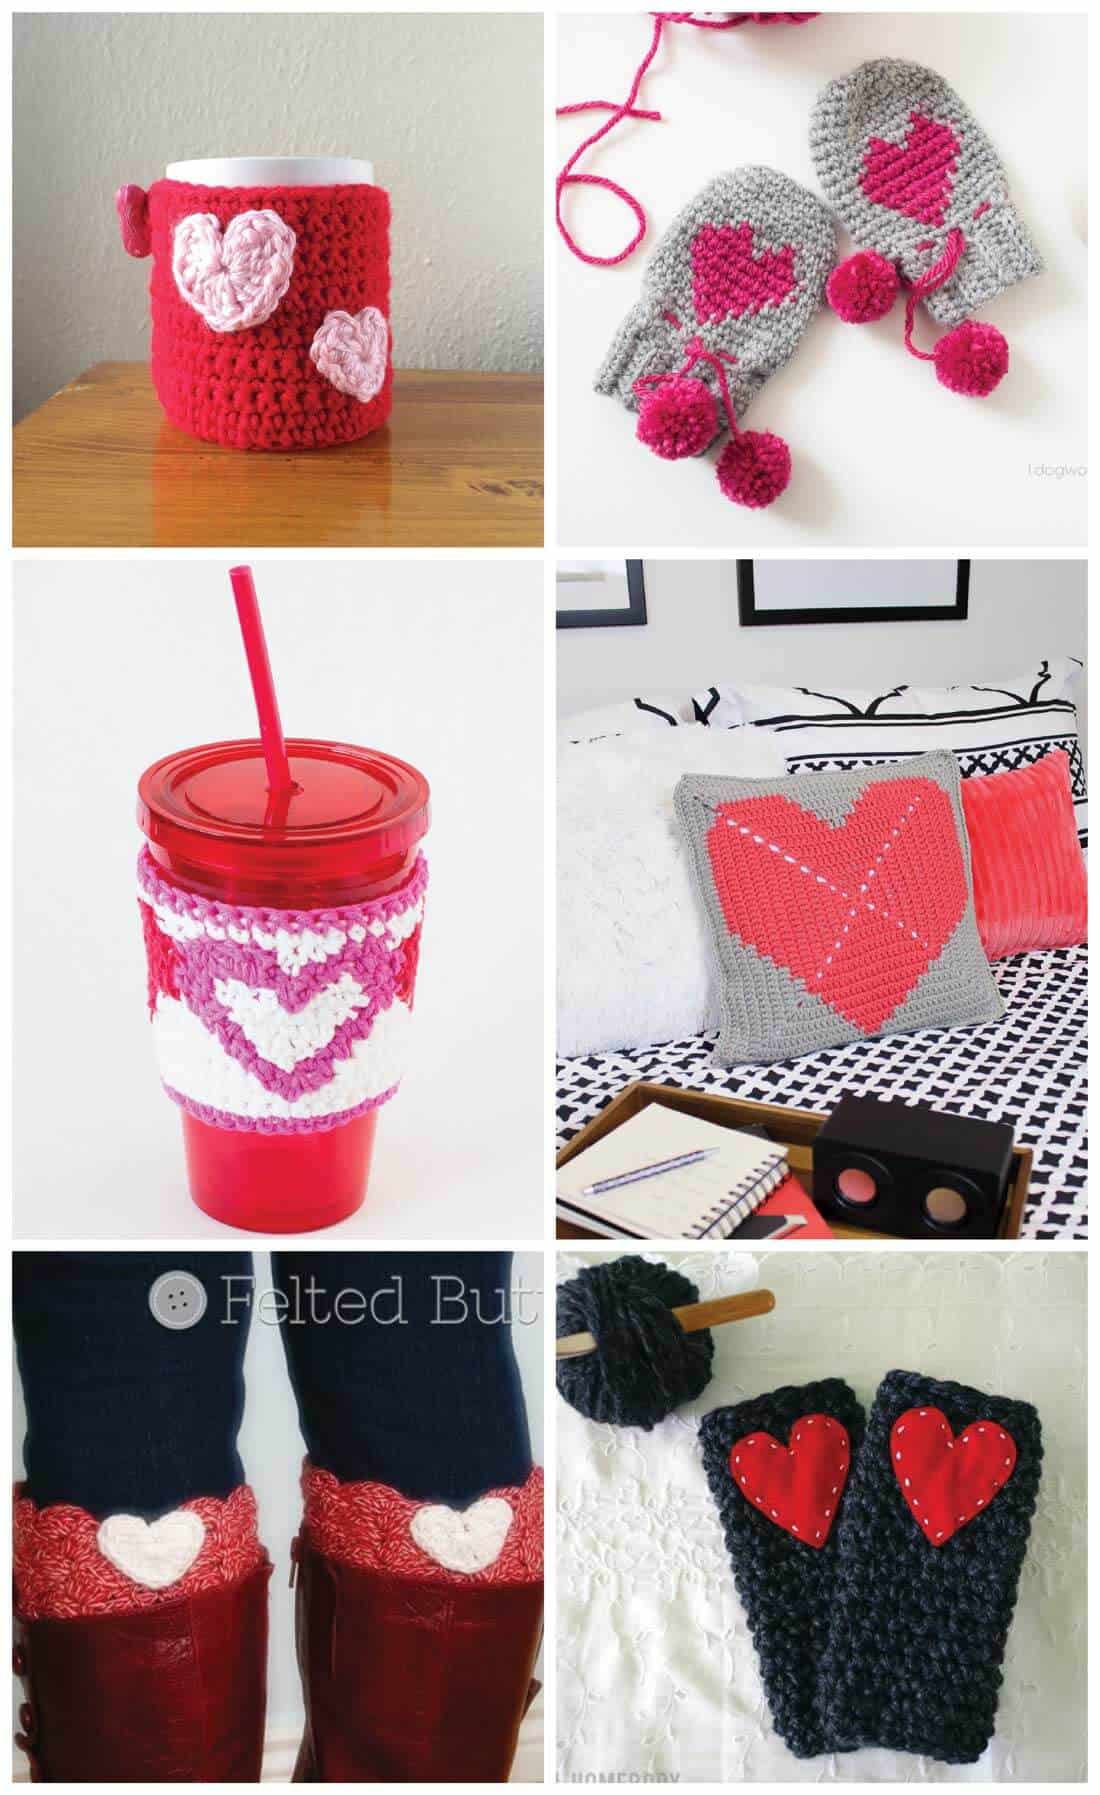 crochet heart patterns | free crochet patterns | Daisy Cottage Designs These crochet patterns make wonderful gifts for everyone on your list this Valentine's Day! 